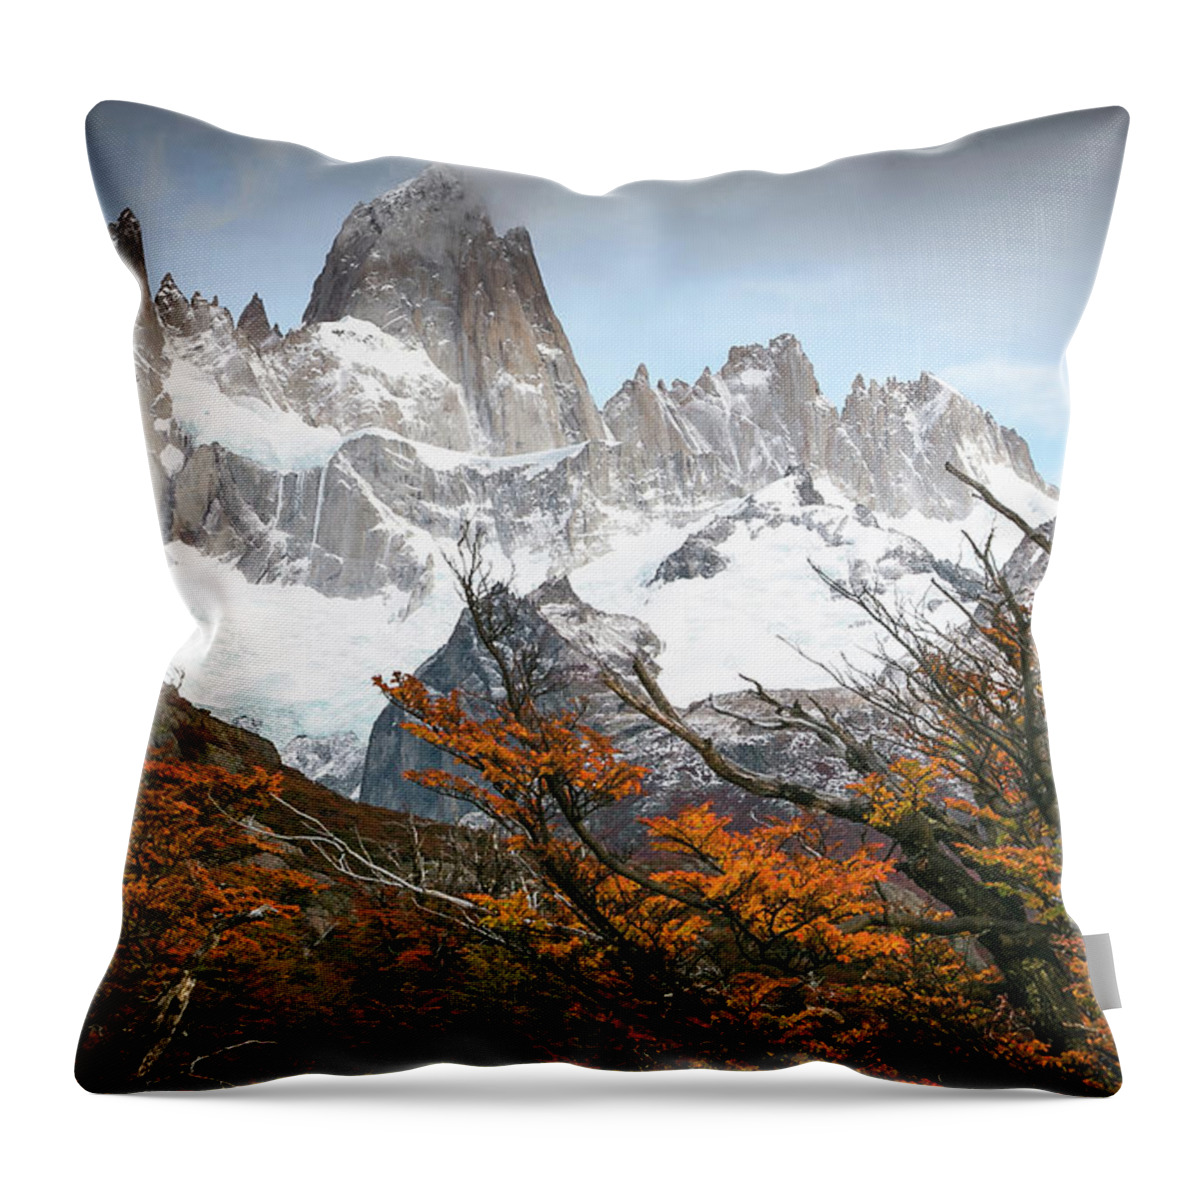 Patagonia Throw Pillow featuring the photograph Futrone by Ryan Weddle